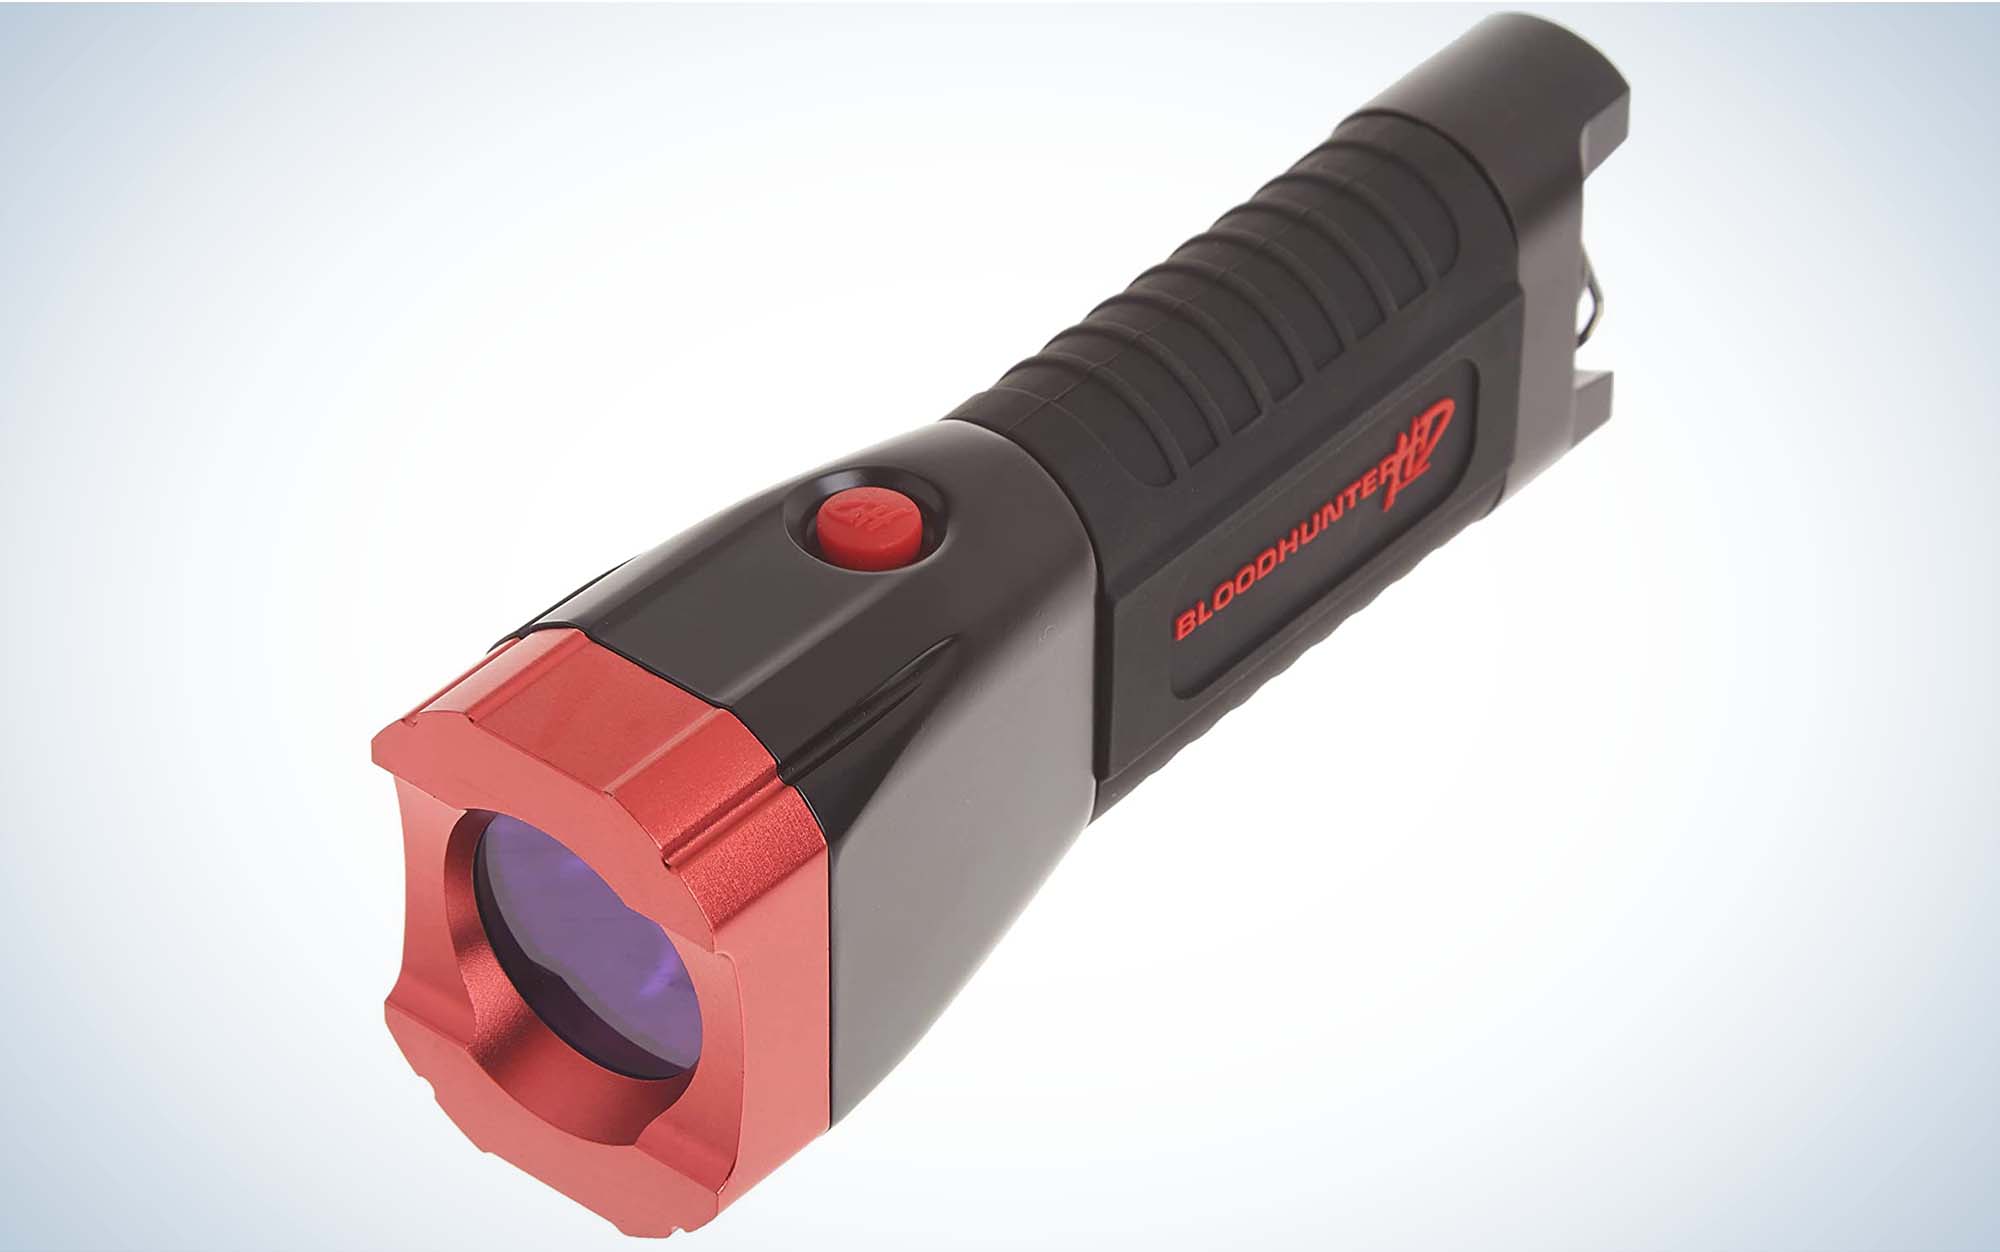 The Primos Bloodhunter HD is the best flashlight for blood tracking.